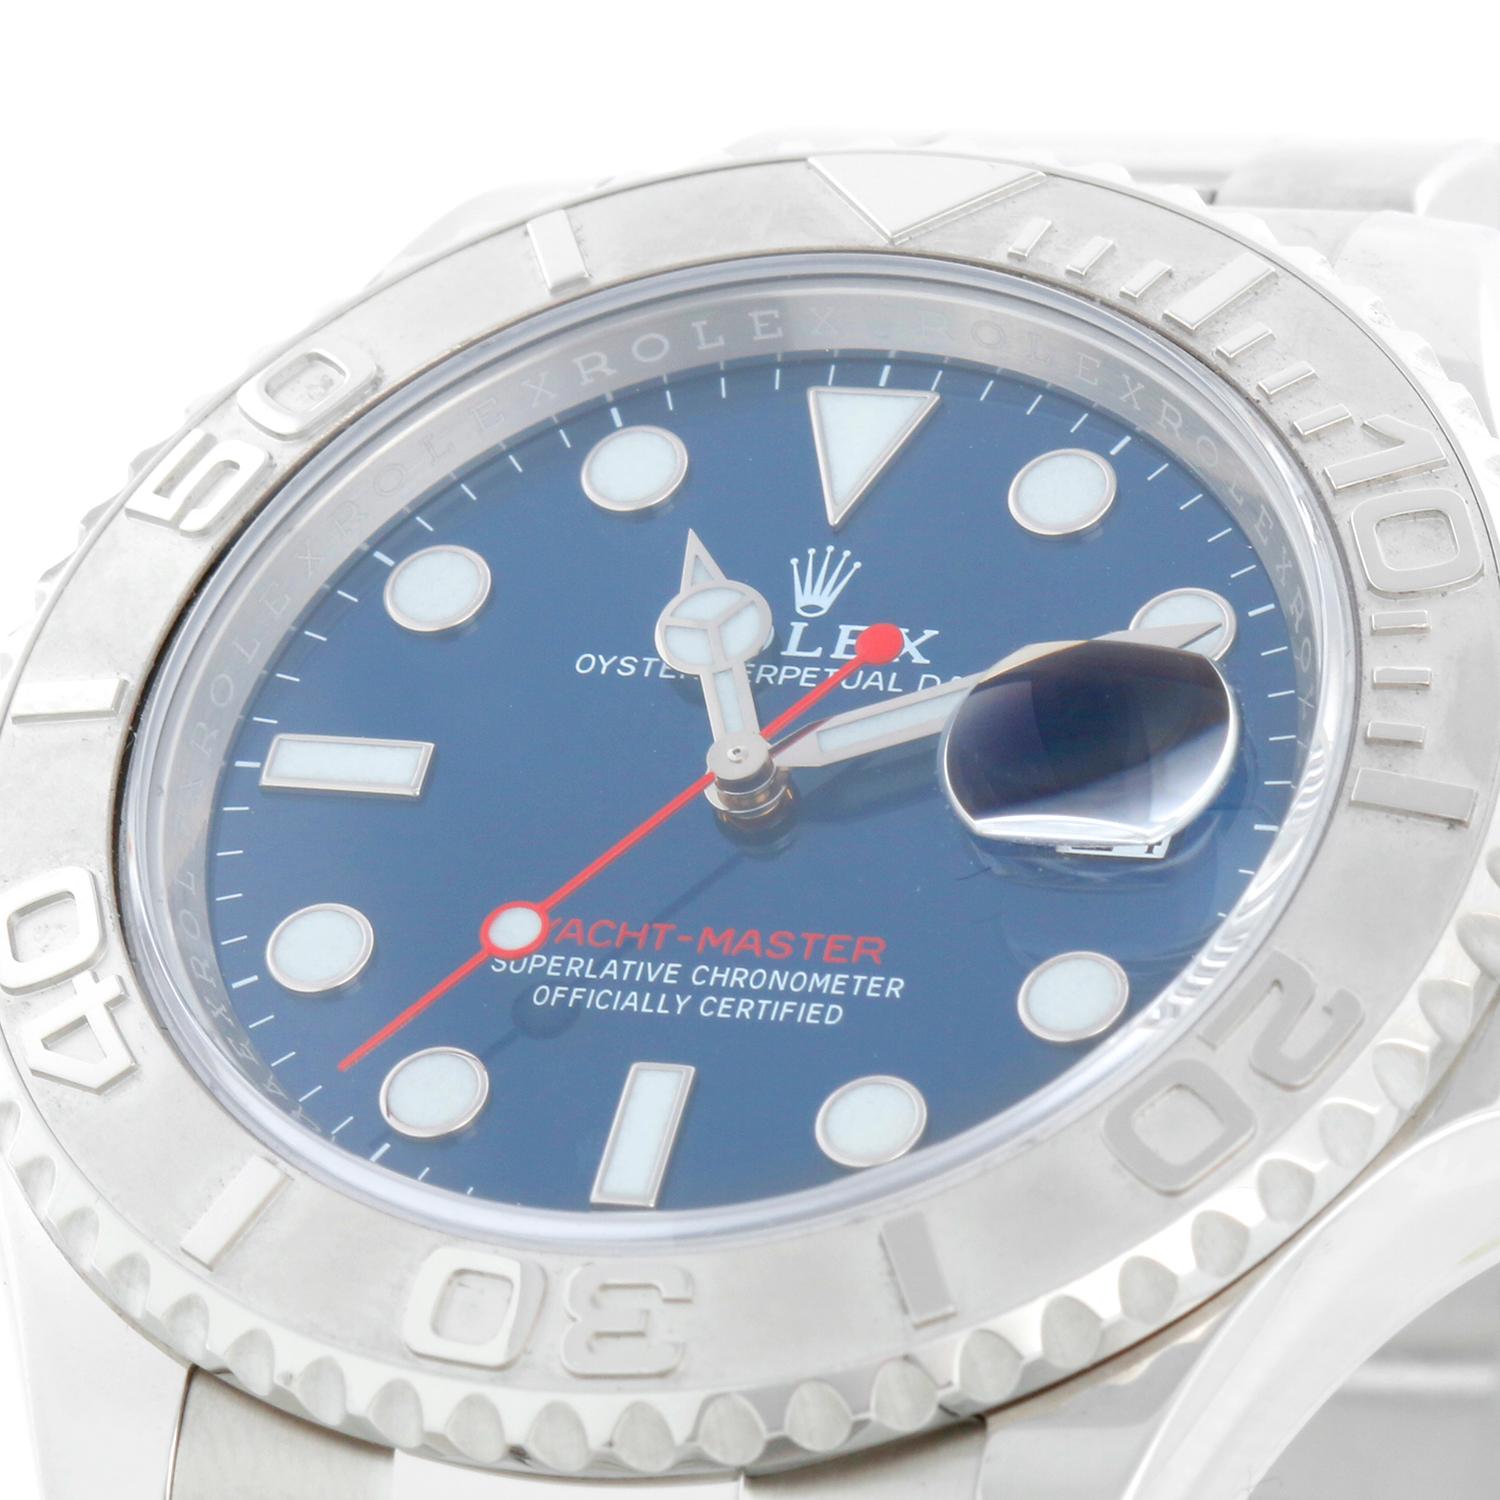 Rolex Yacht-Master Men's Stainless Steel Watch 126622 For Sale 1